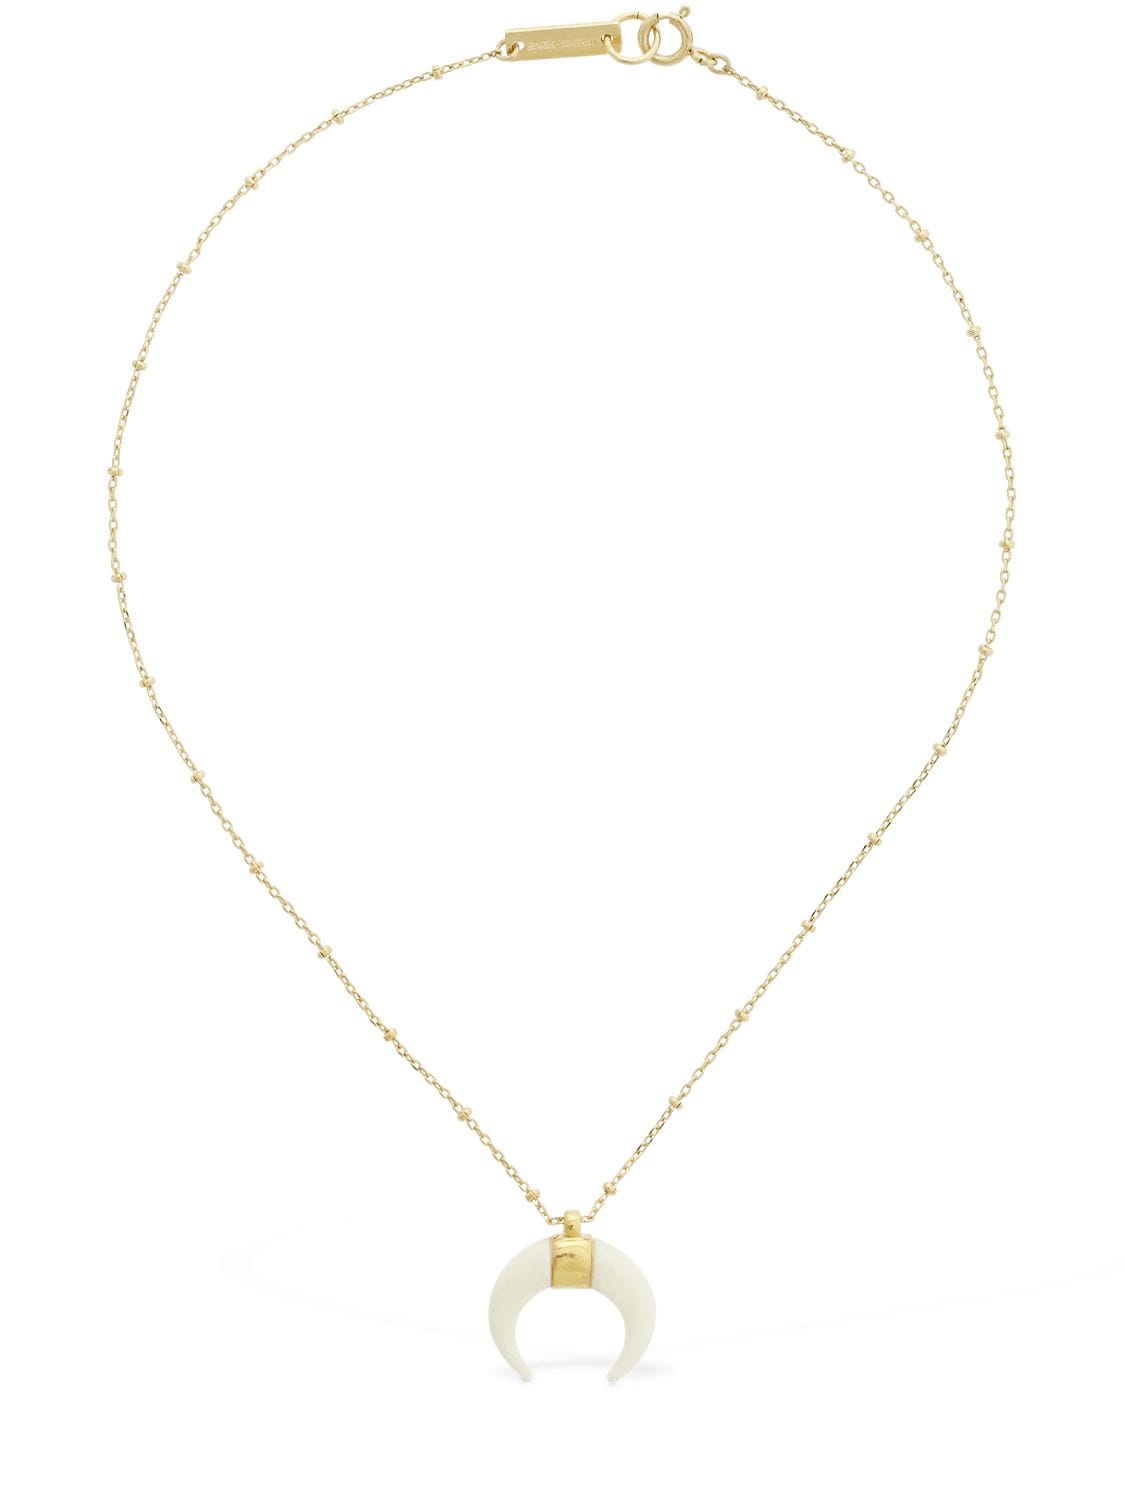 ISABEL MARANT AIMABLE SHORT NECKLACE W/ HORN